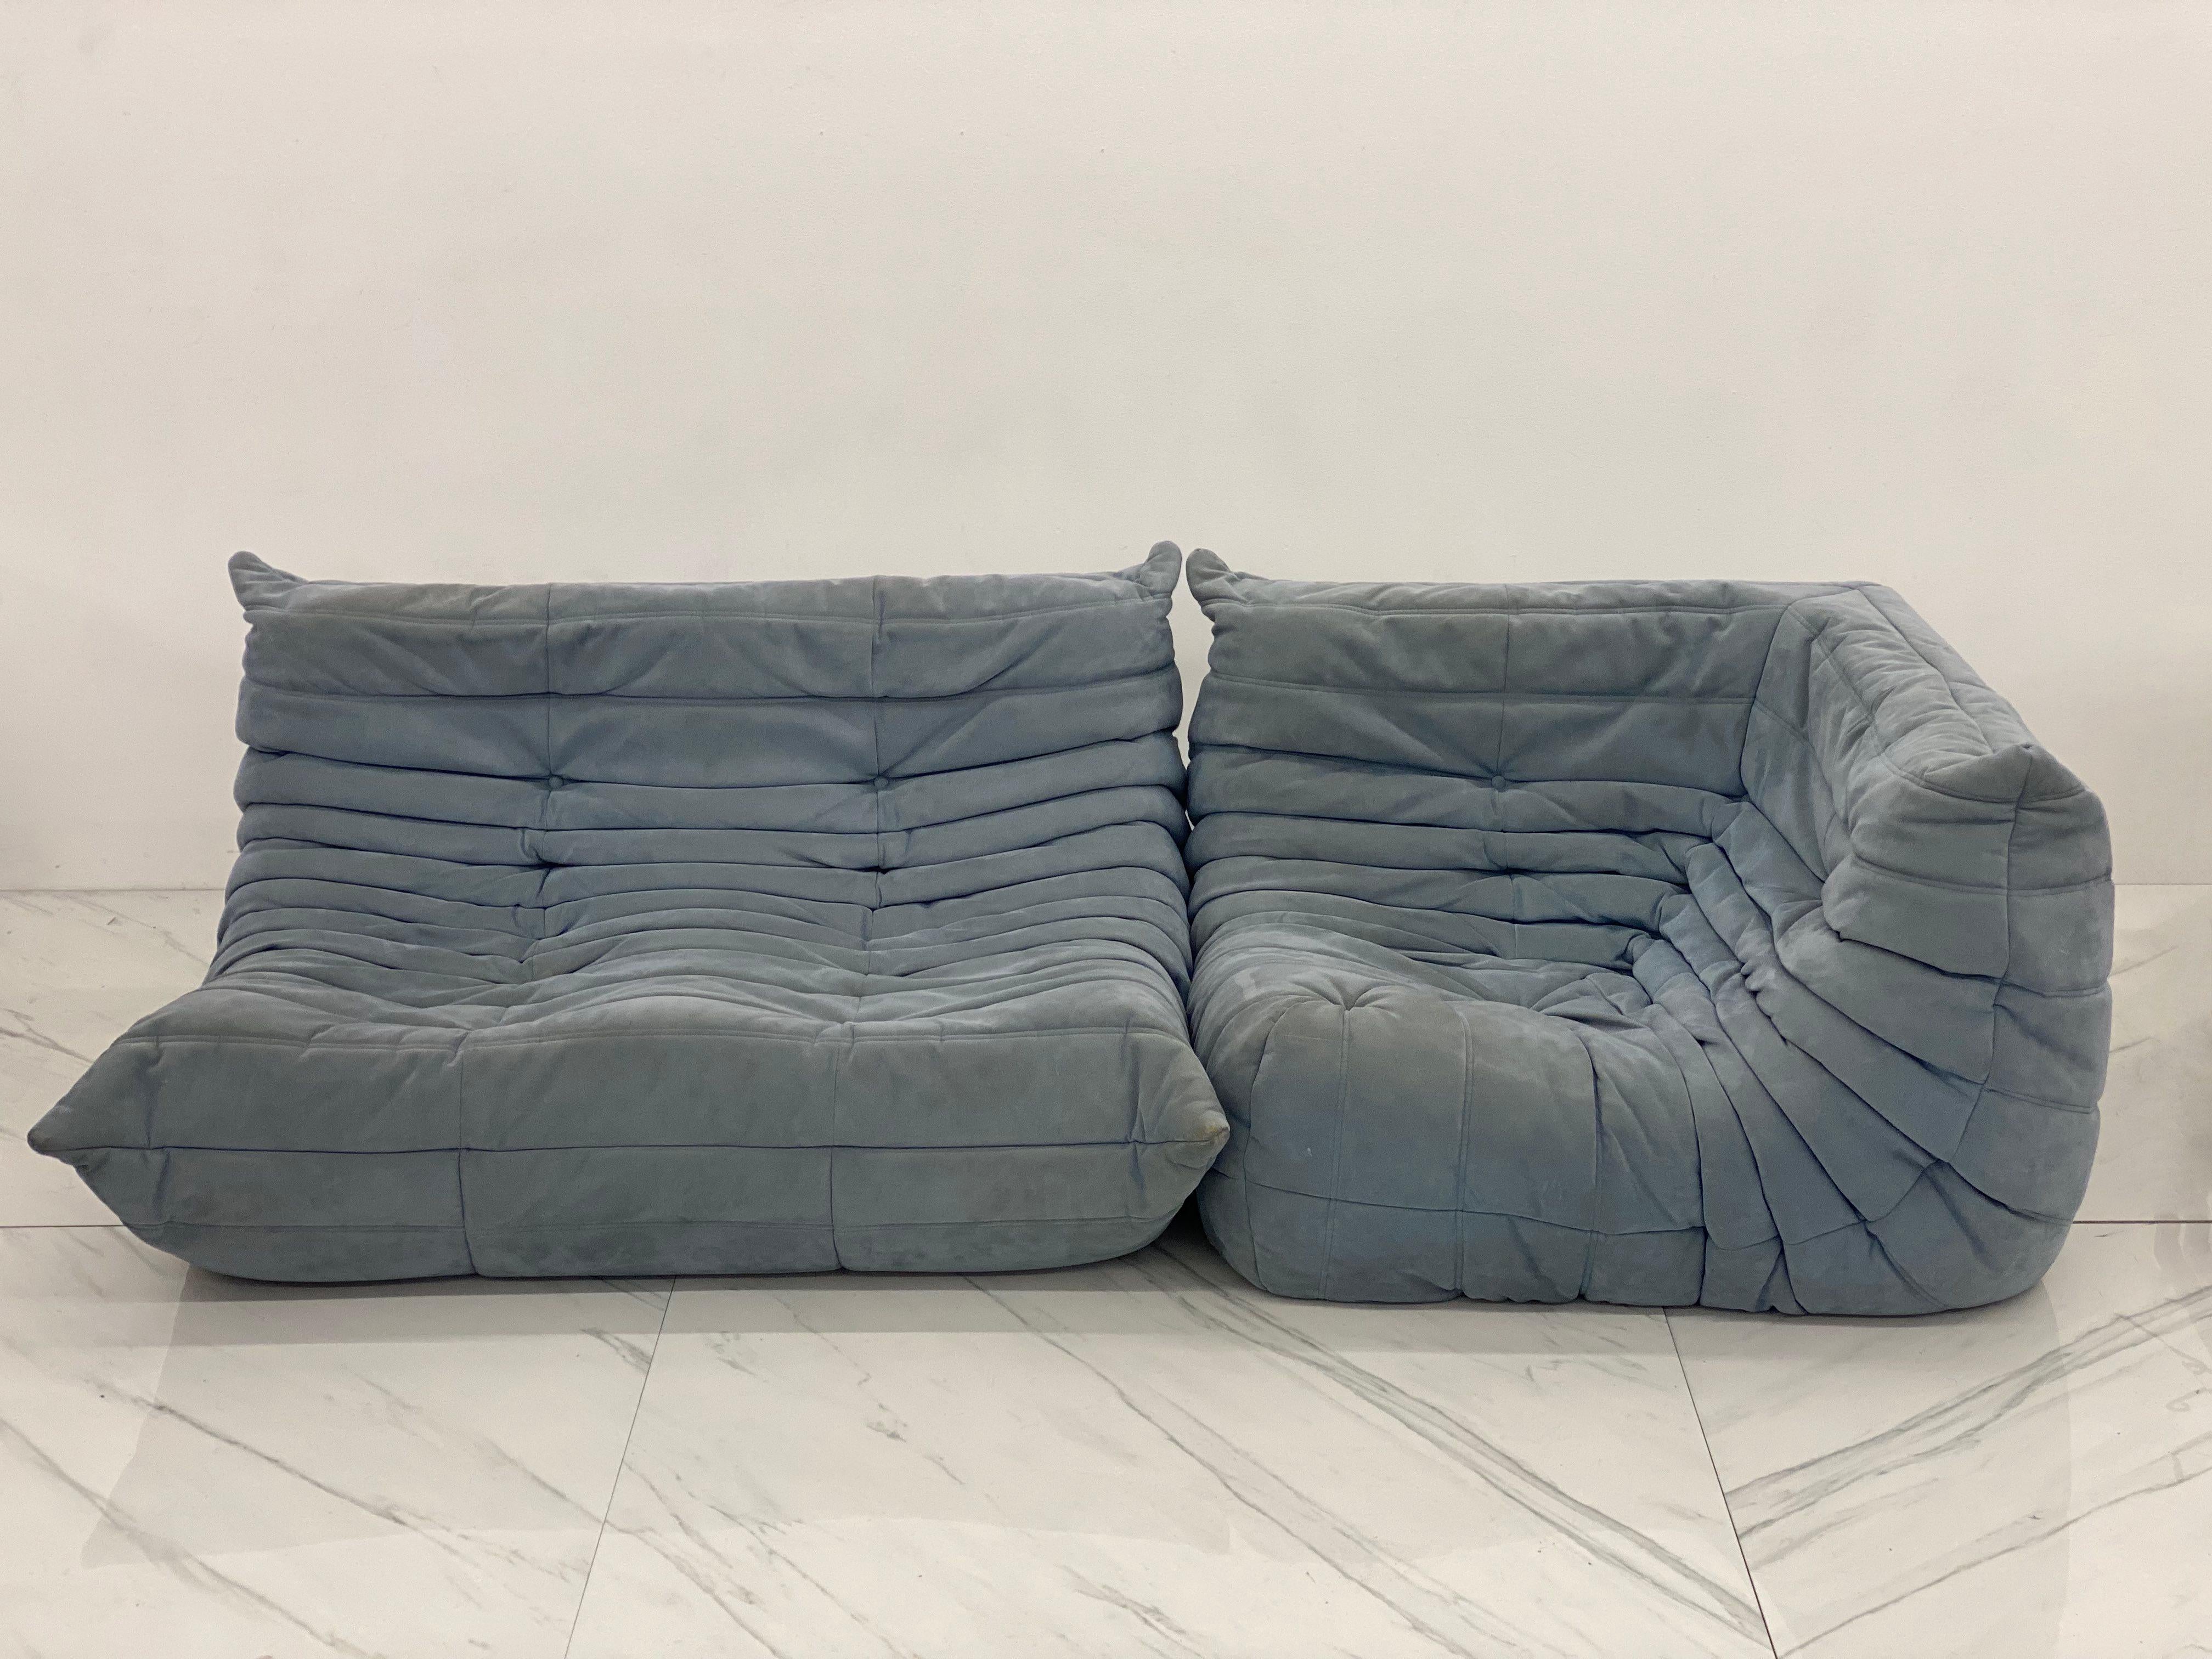 French Baby Blue 'Togo' Sectional Sofa by Michel Ducaroy for Ligne Roset, Signed